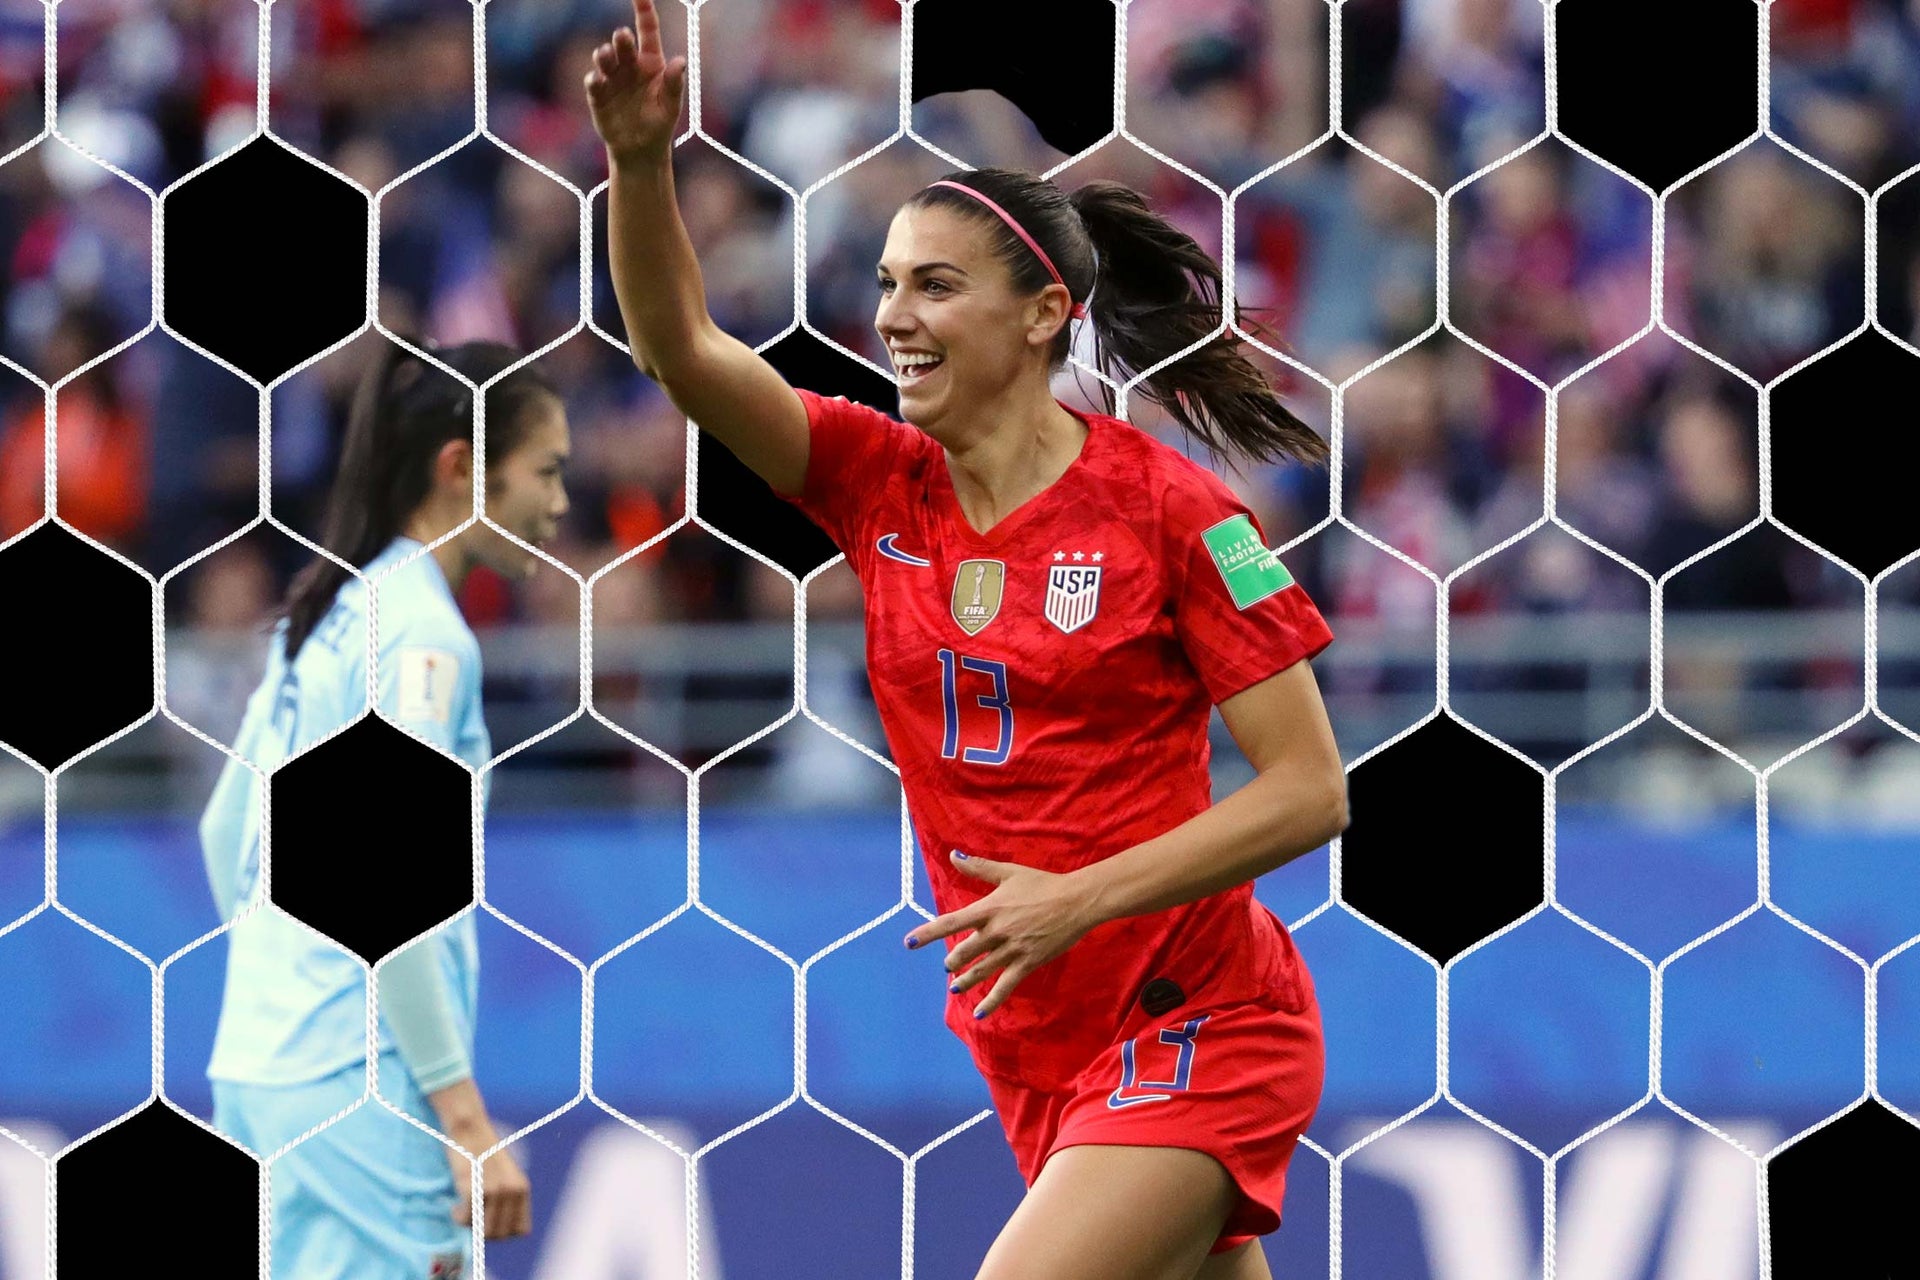 Alex scored five goals in the USWNT's World Cup opener. Seems